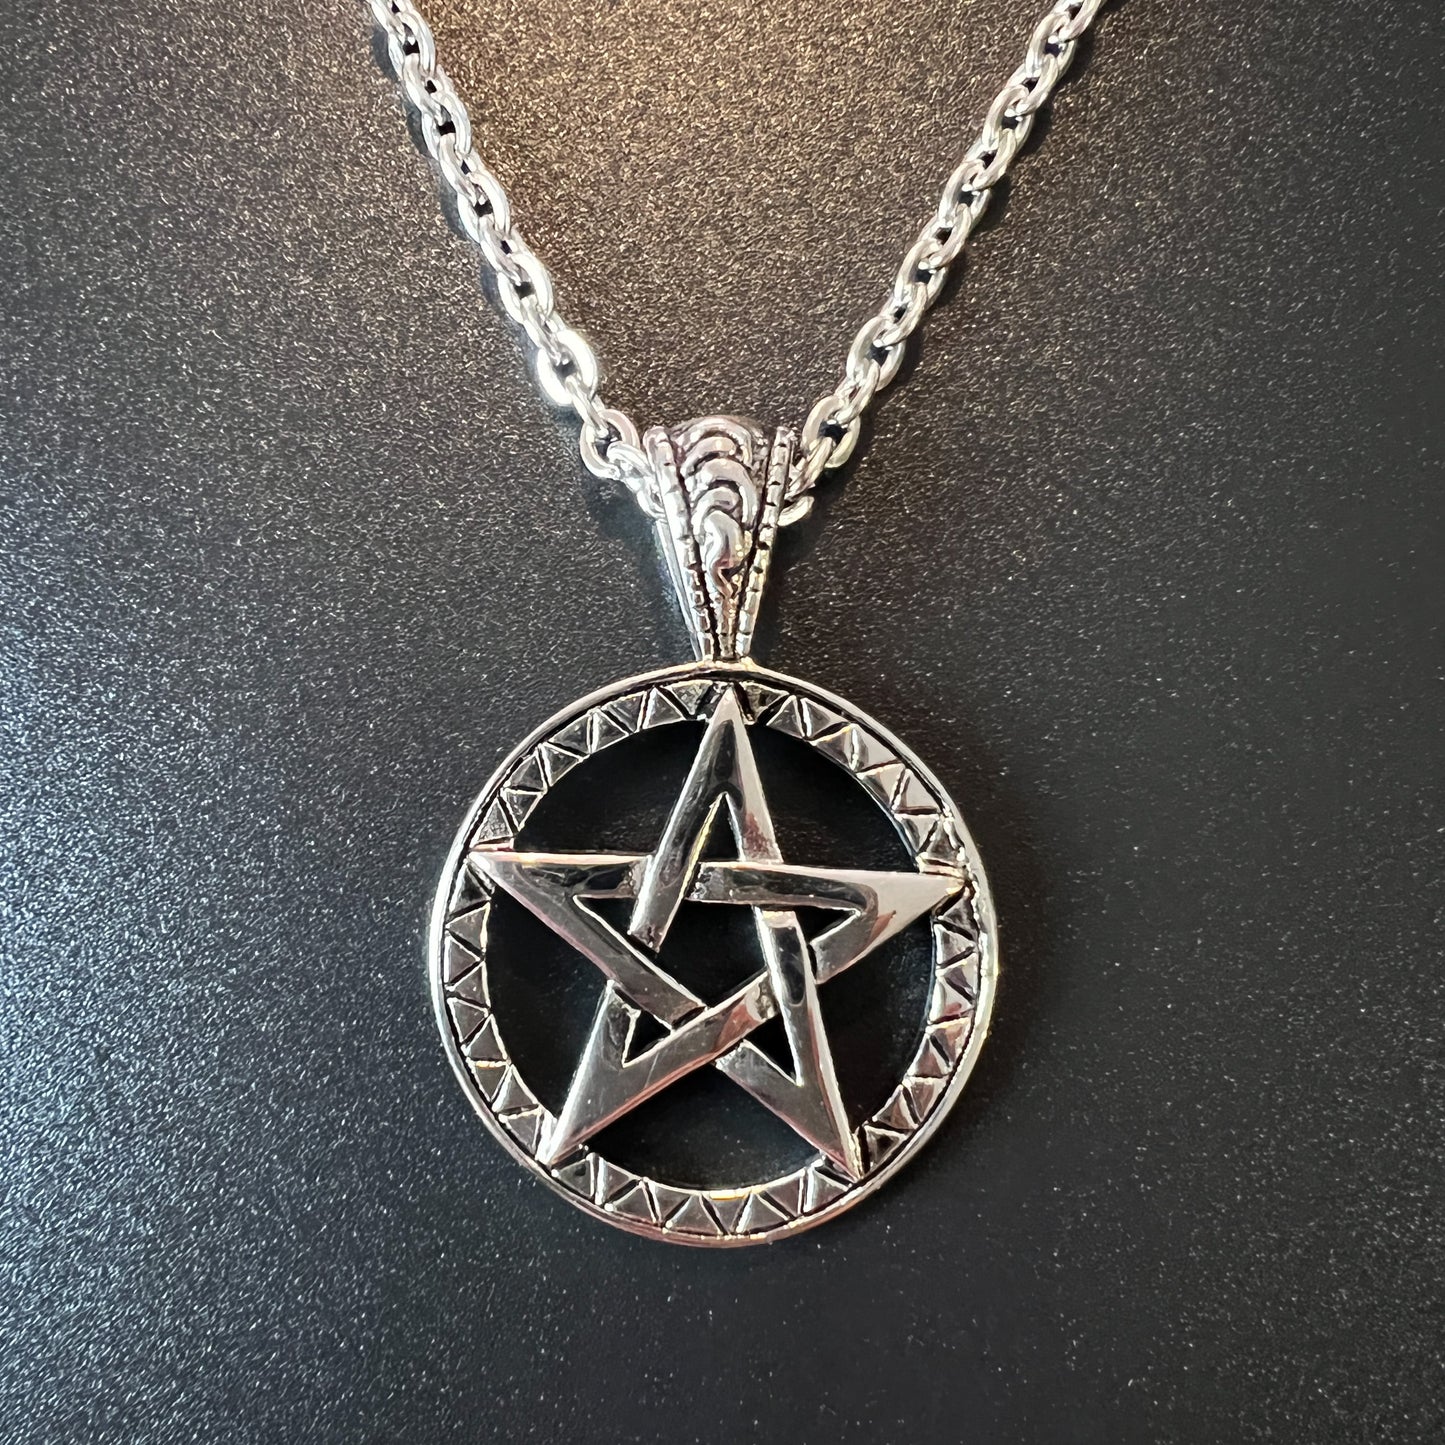 Stainless steel pentacle witch necklace The French Witch shop